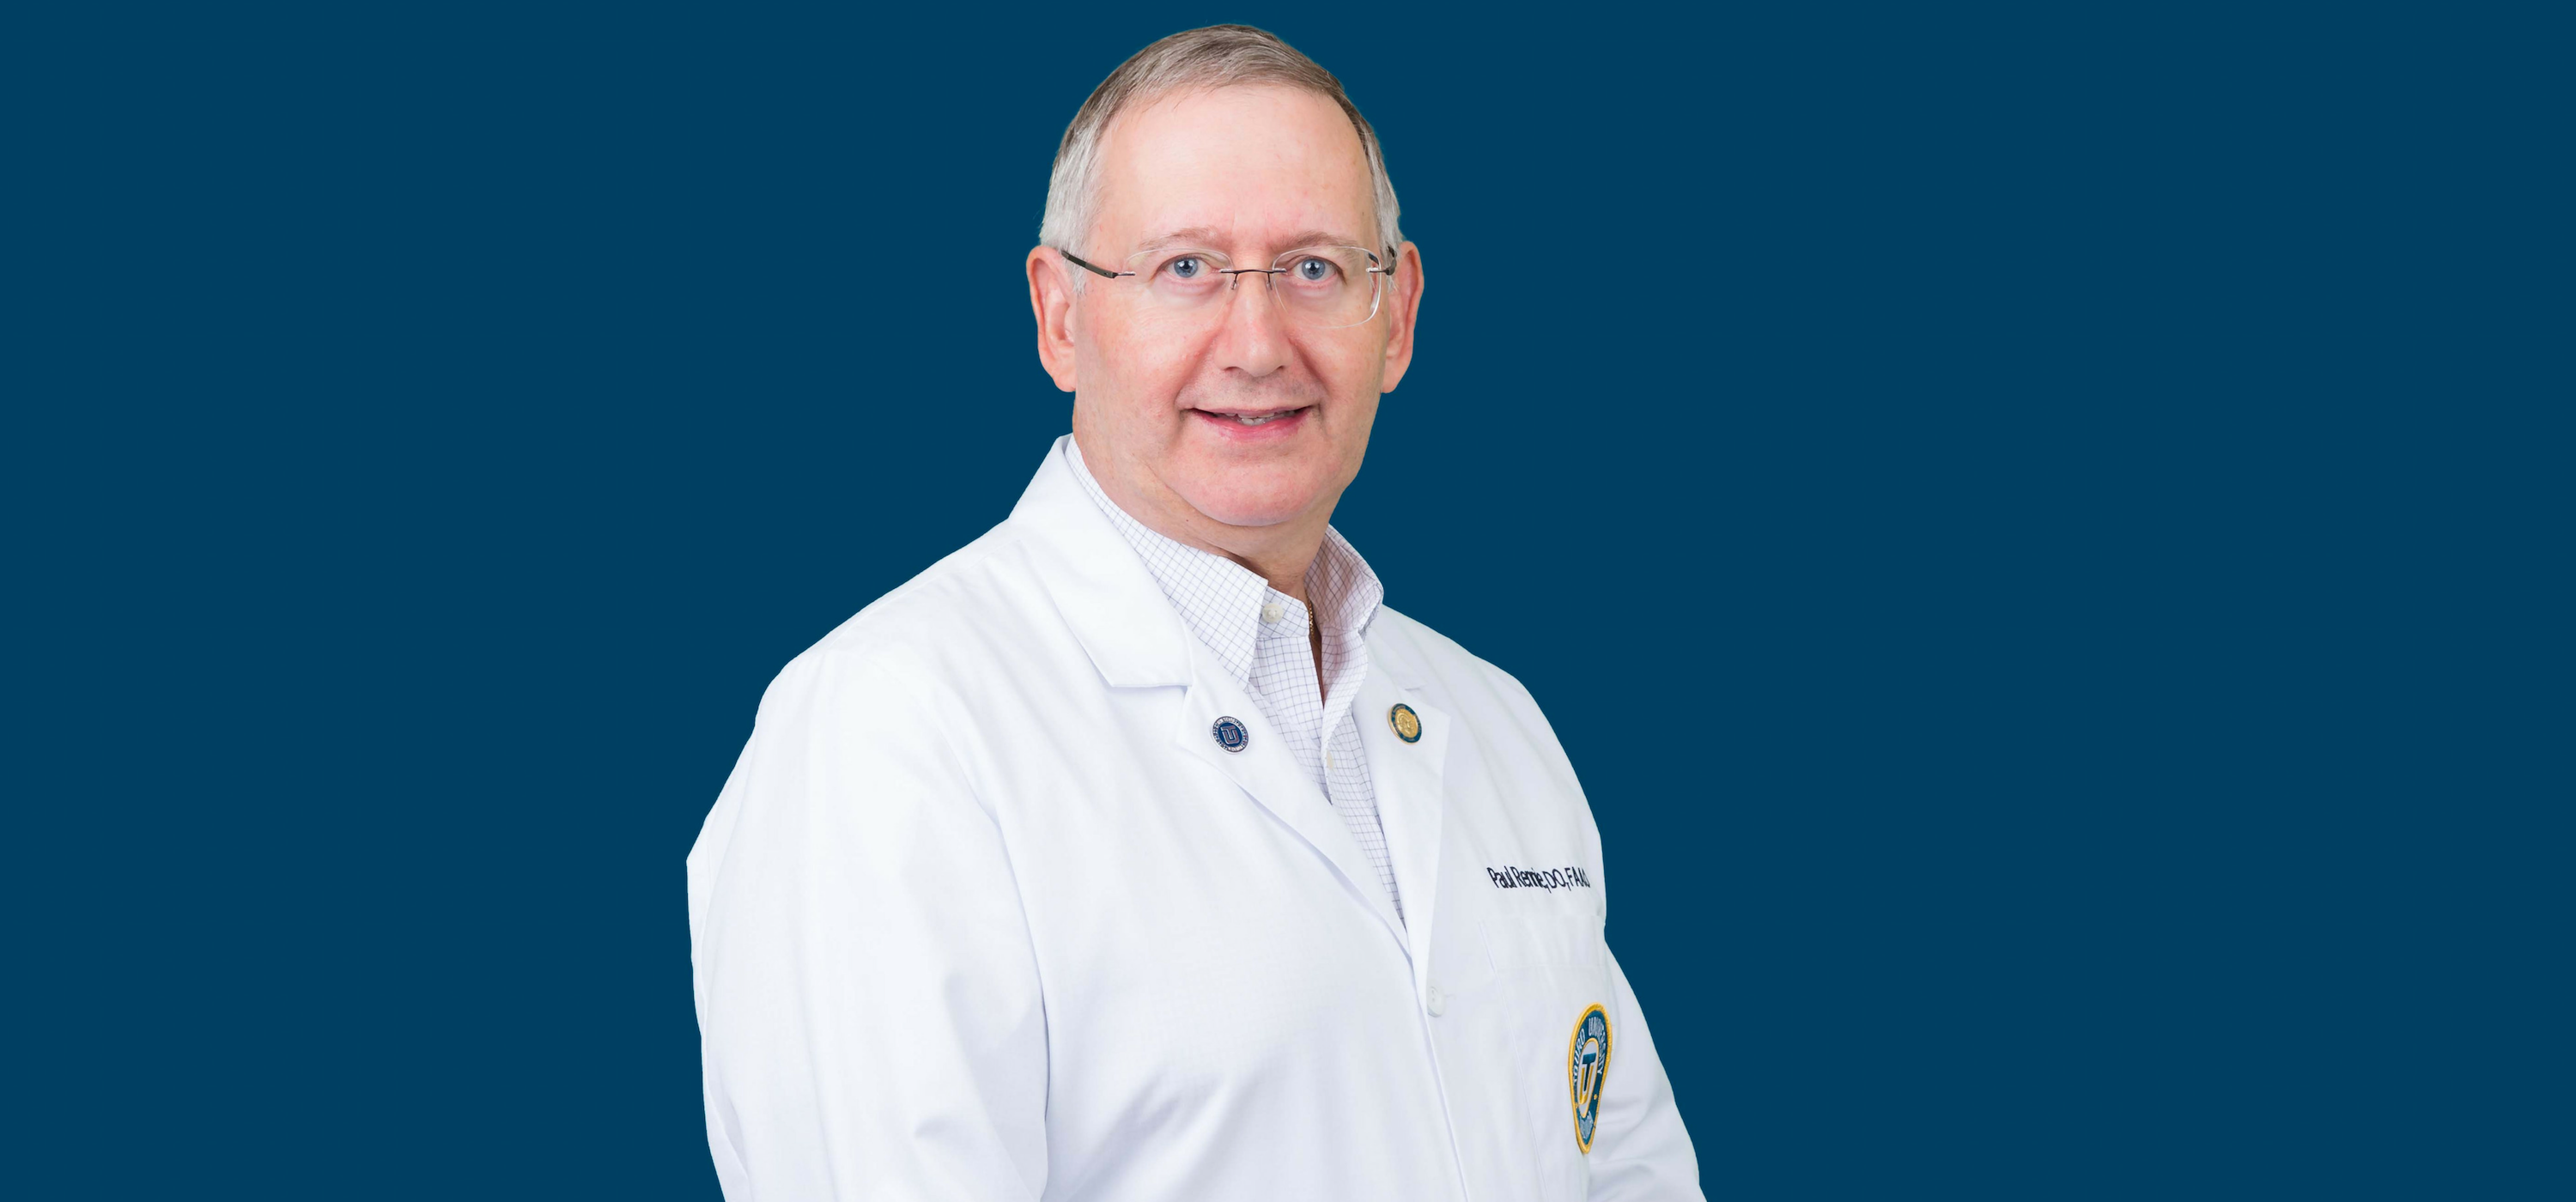 Paul R. Rennie, DO, FAAO, Voted President-Elect of National Osteopathic Medical Association